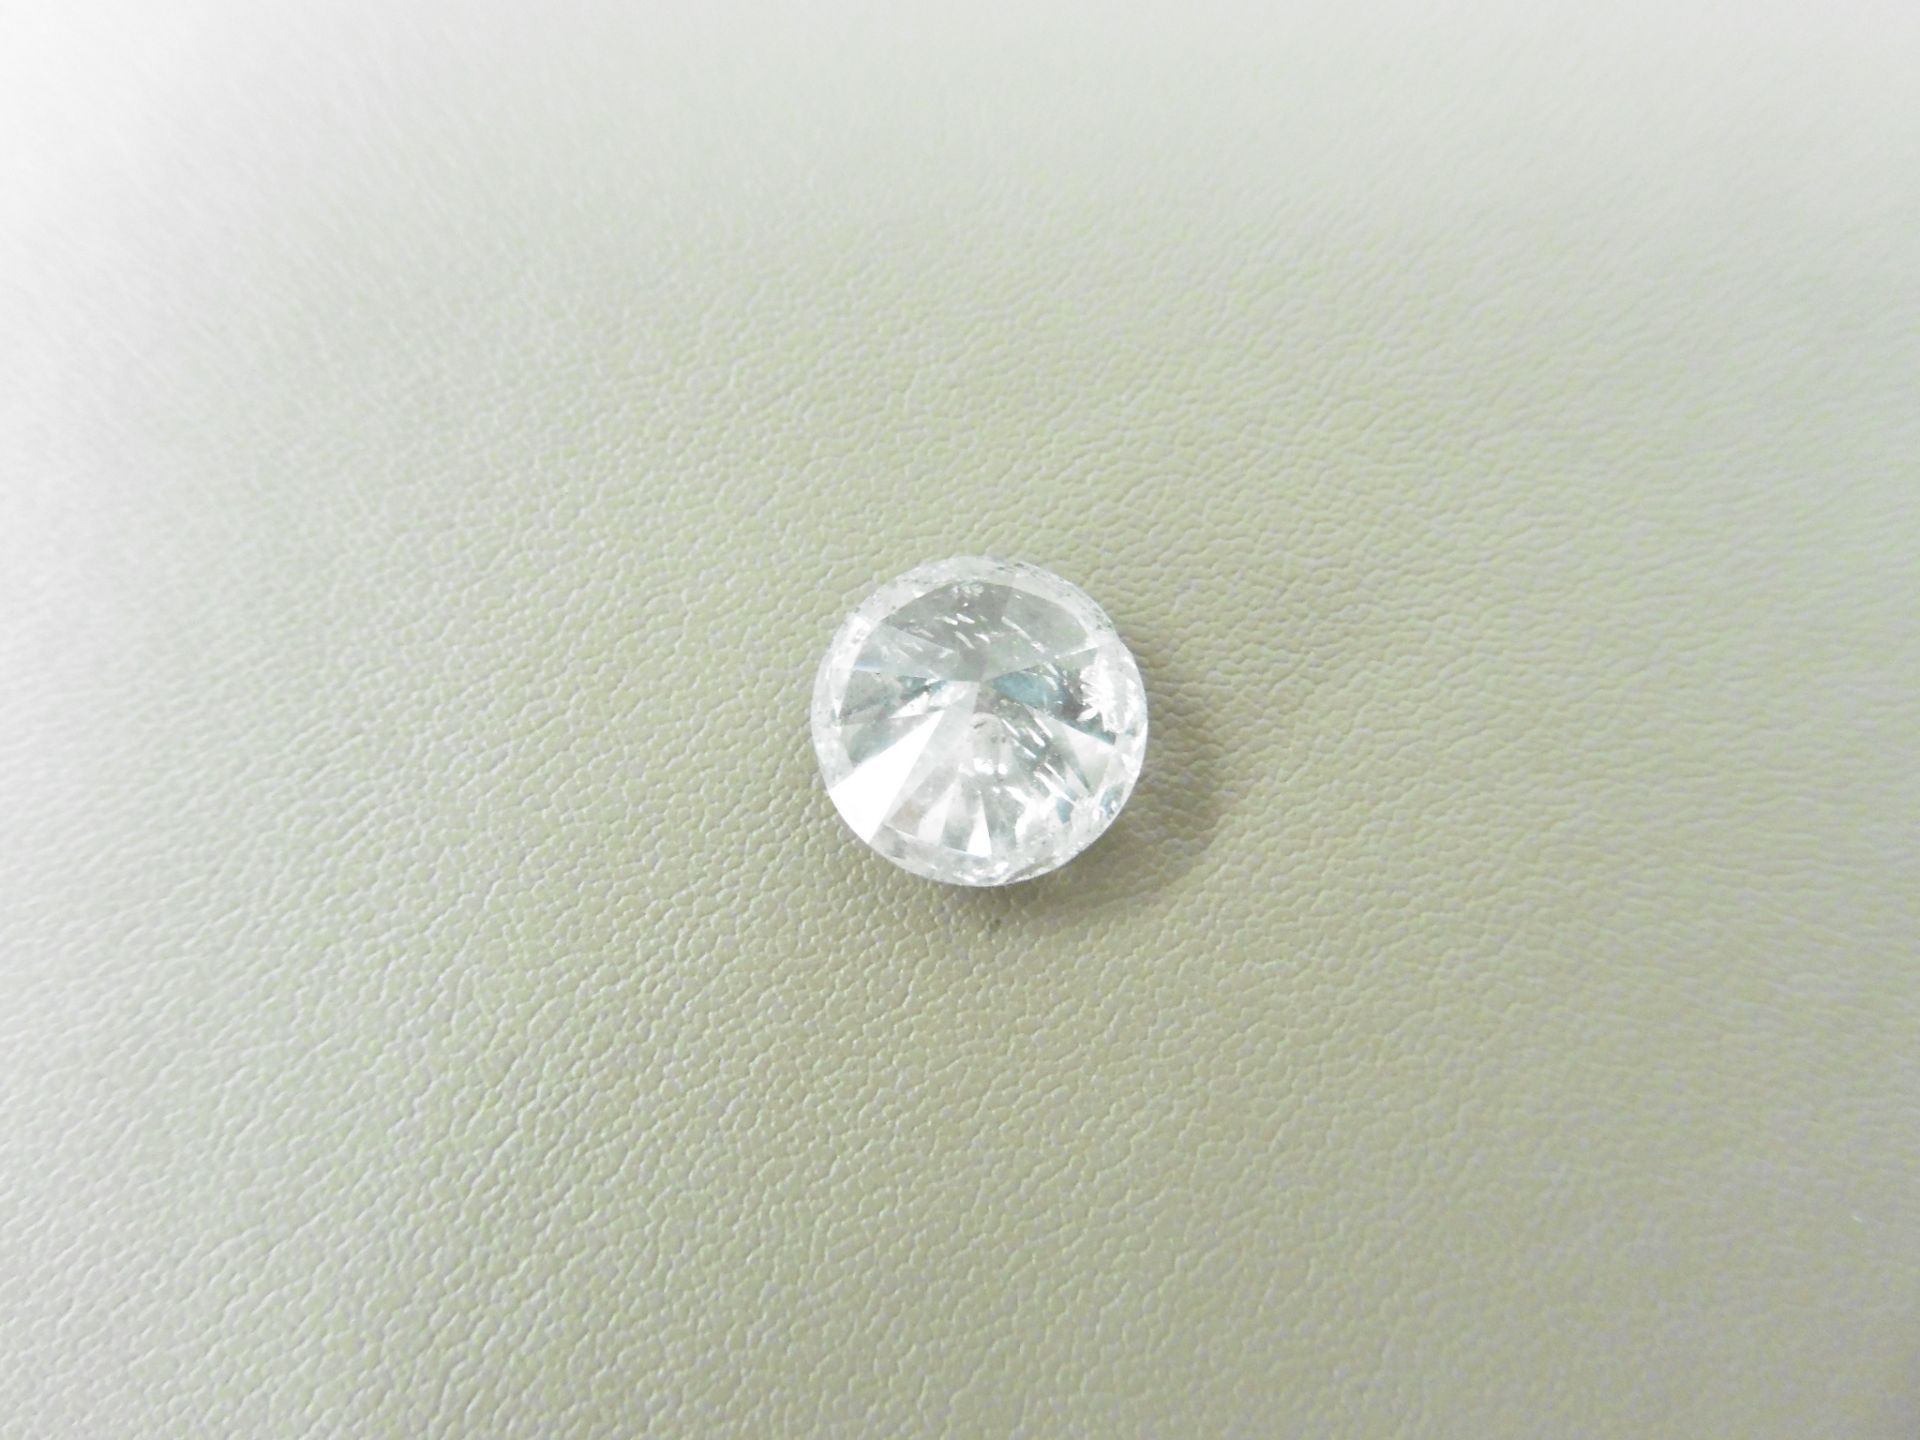 4.13ct natural loose brilliant cut diamond. G colour and I1 clarity. Natural stone. No certification - Image 5 of 5